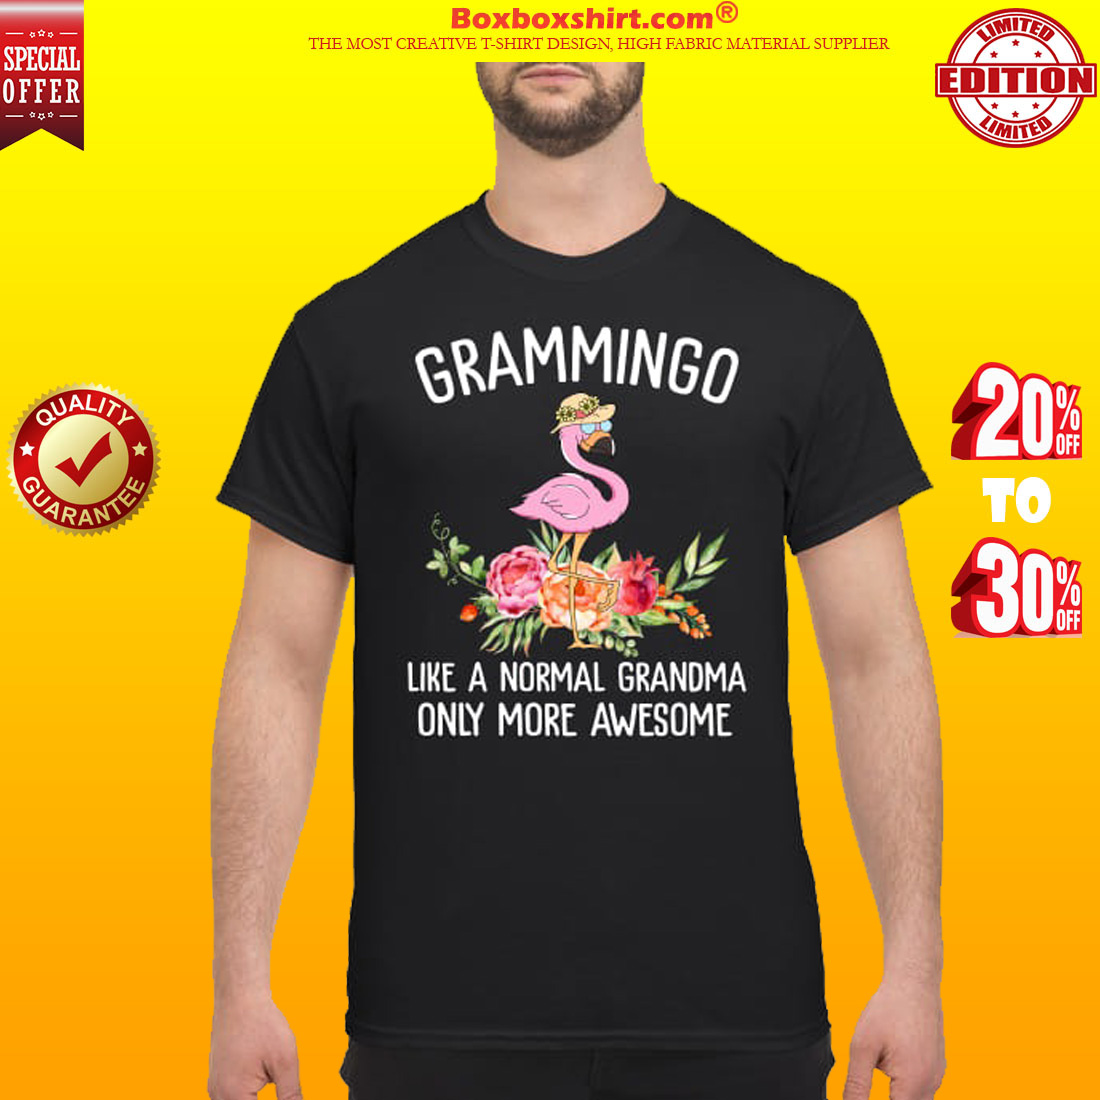 Grammingo like a normal grandma only more awesome classic shirt